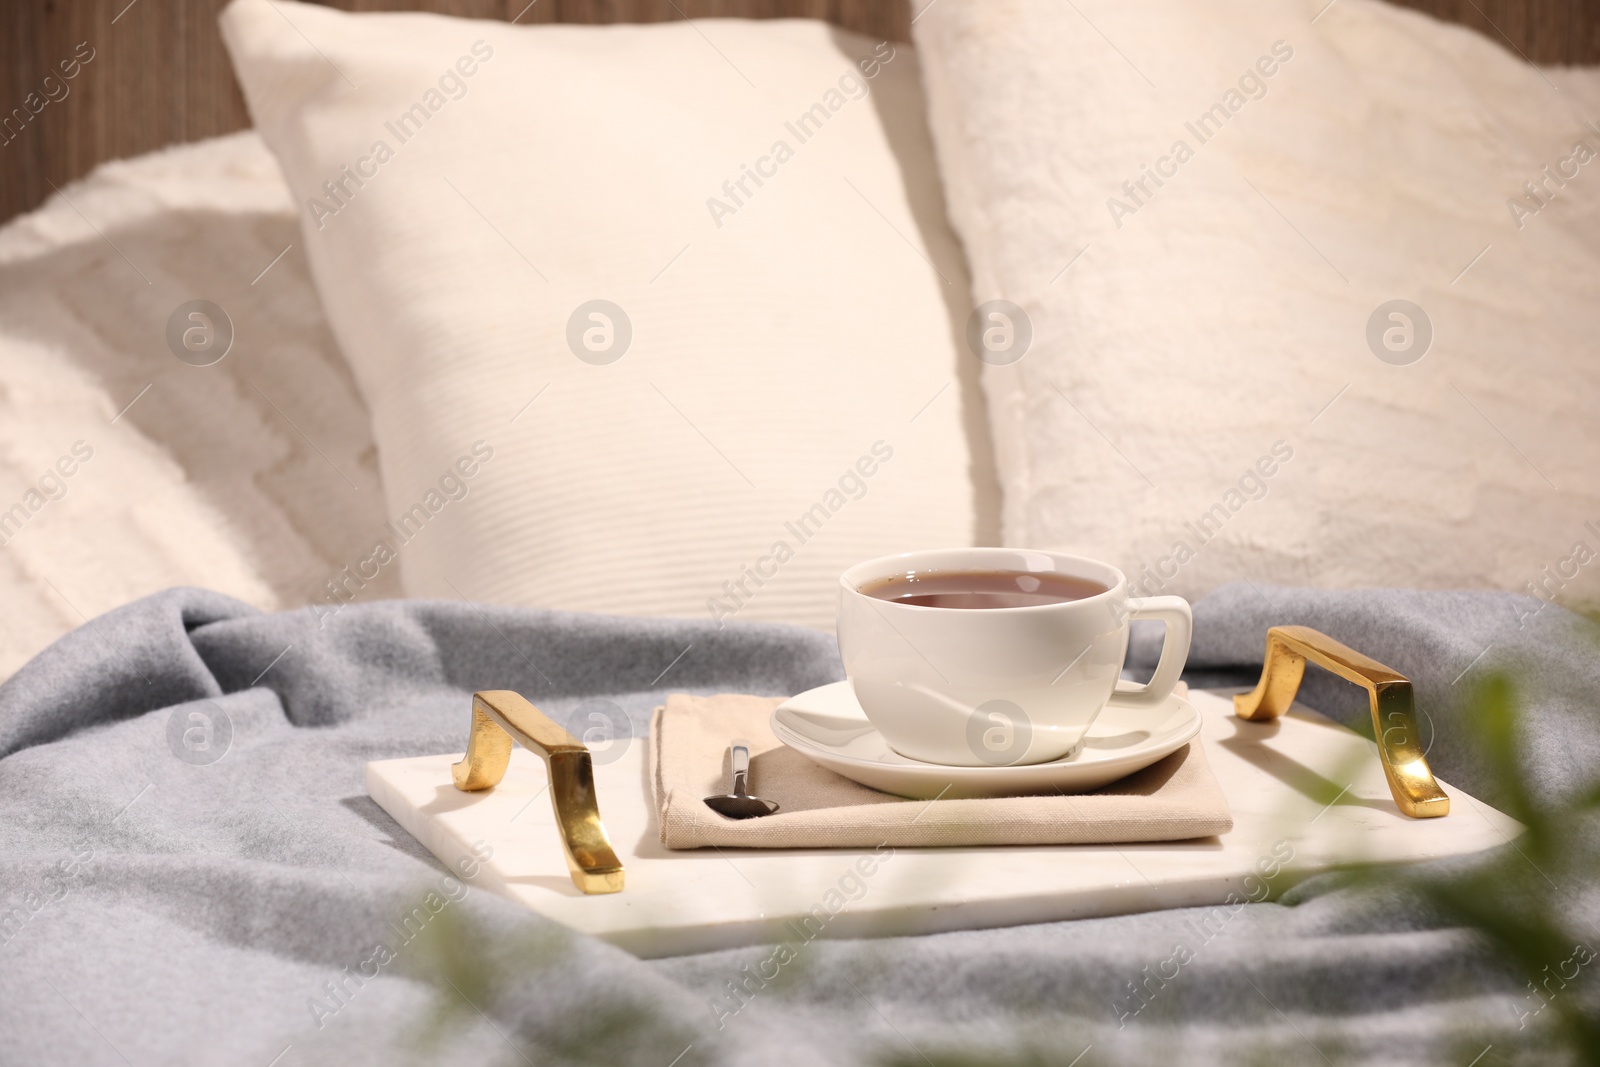 Photo of Aromatic tea in cup, saucer and spoon on bed